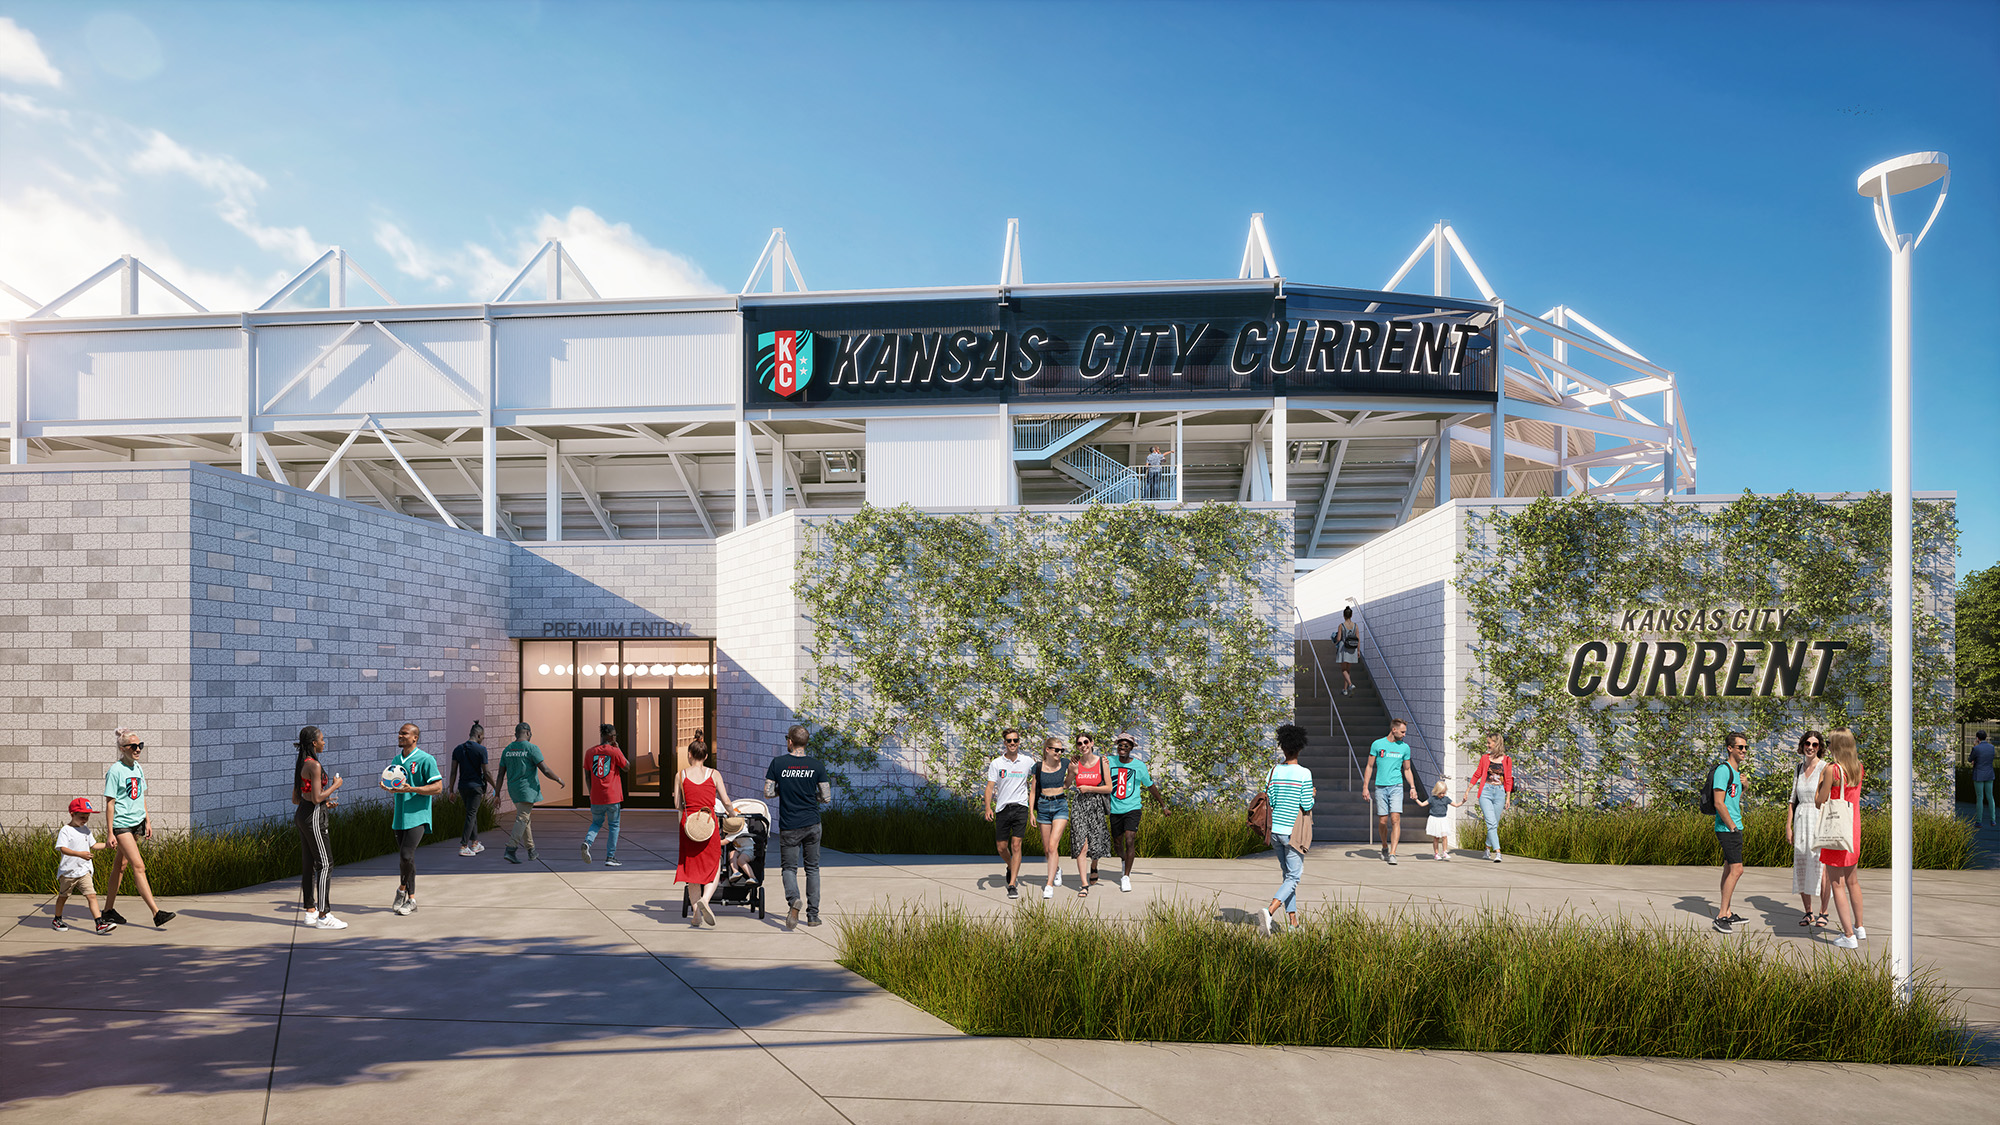 KC Current Pitch Club renderings unveiled - Soccer Stadium Digest